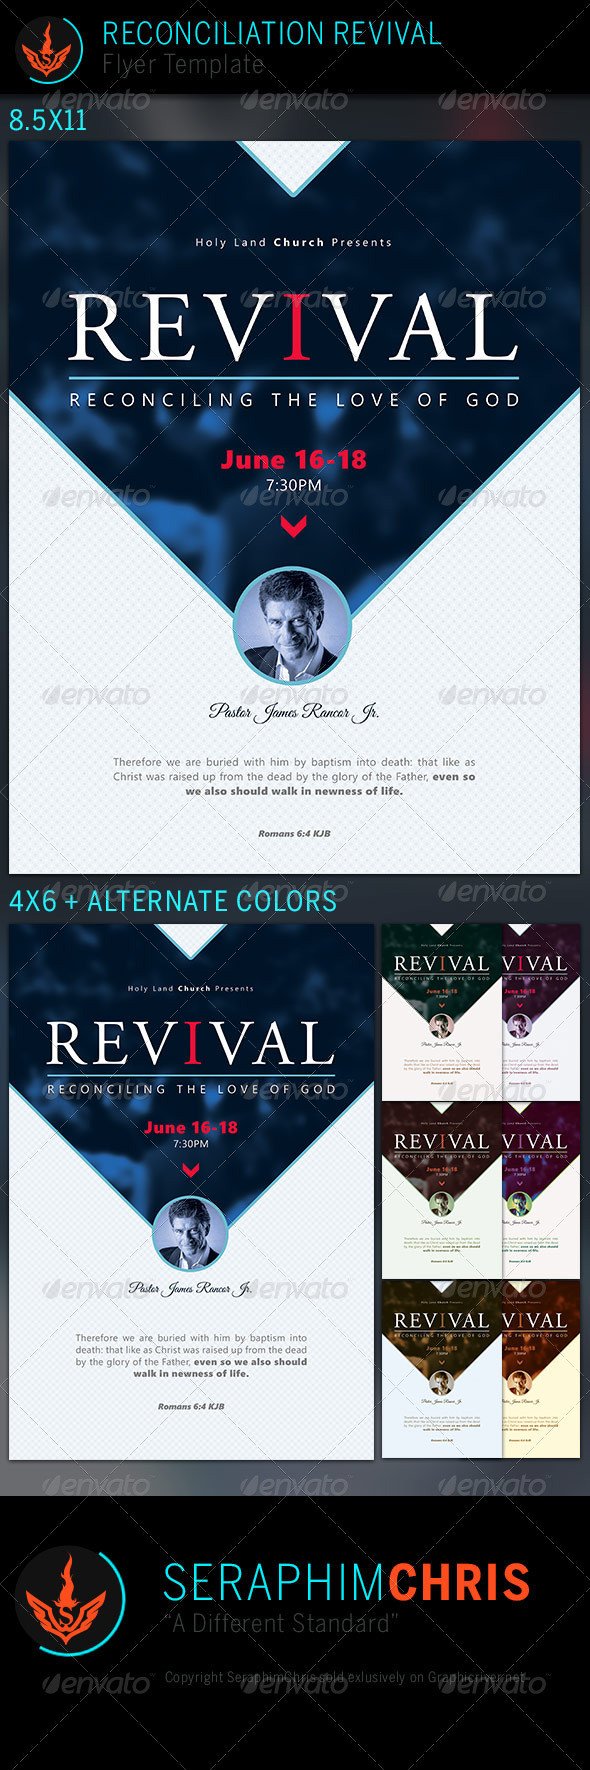 Free Church Revival Flyer Template Reconciliation Revival Church Flyer Template by